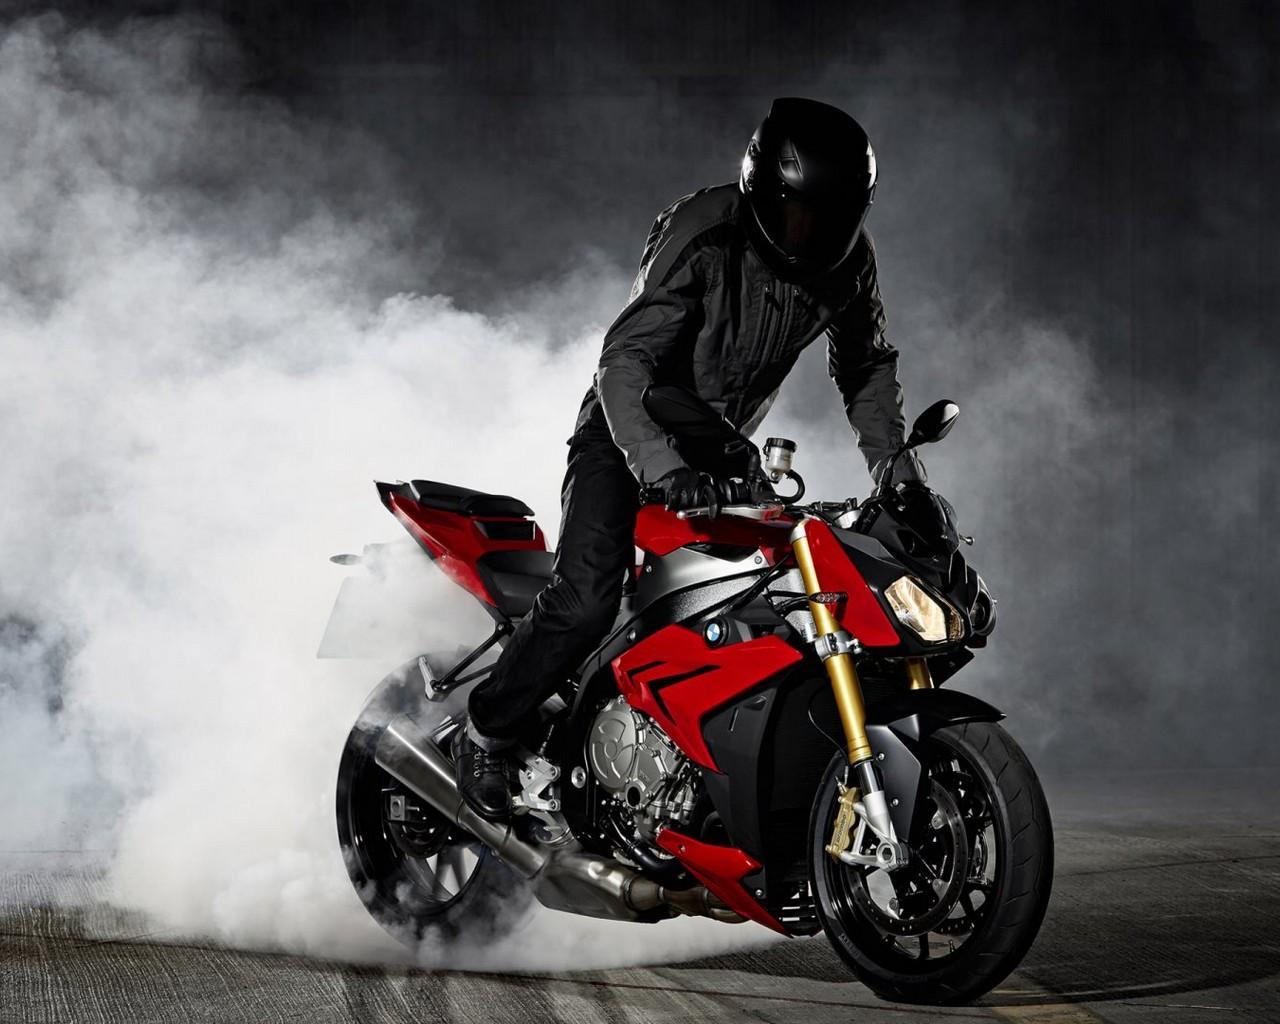 4K Sports Bike Wallpaper HD:Amazon.com:Appstore for Android